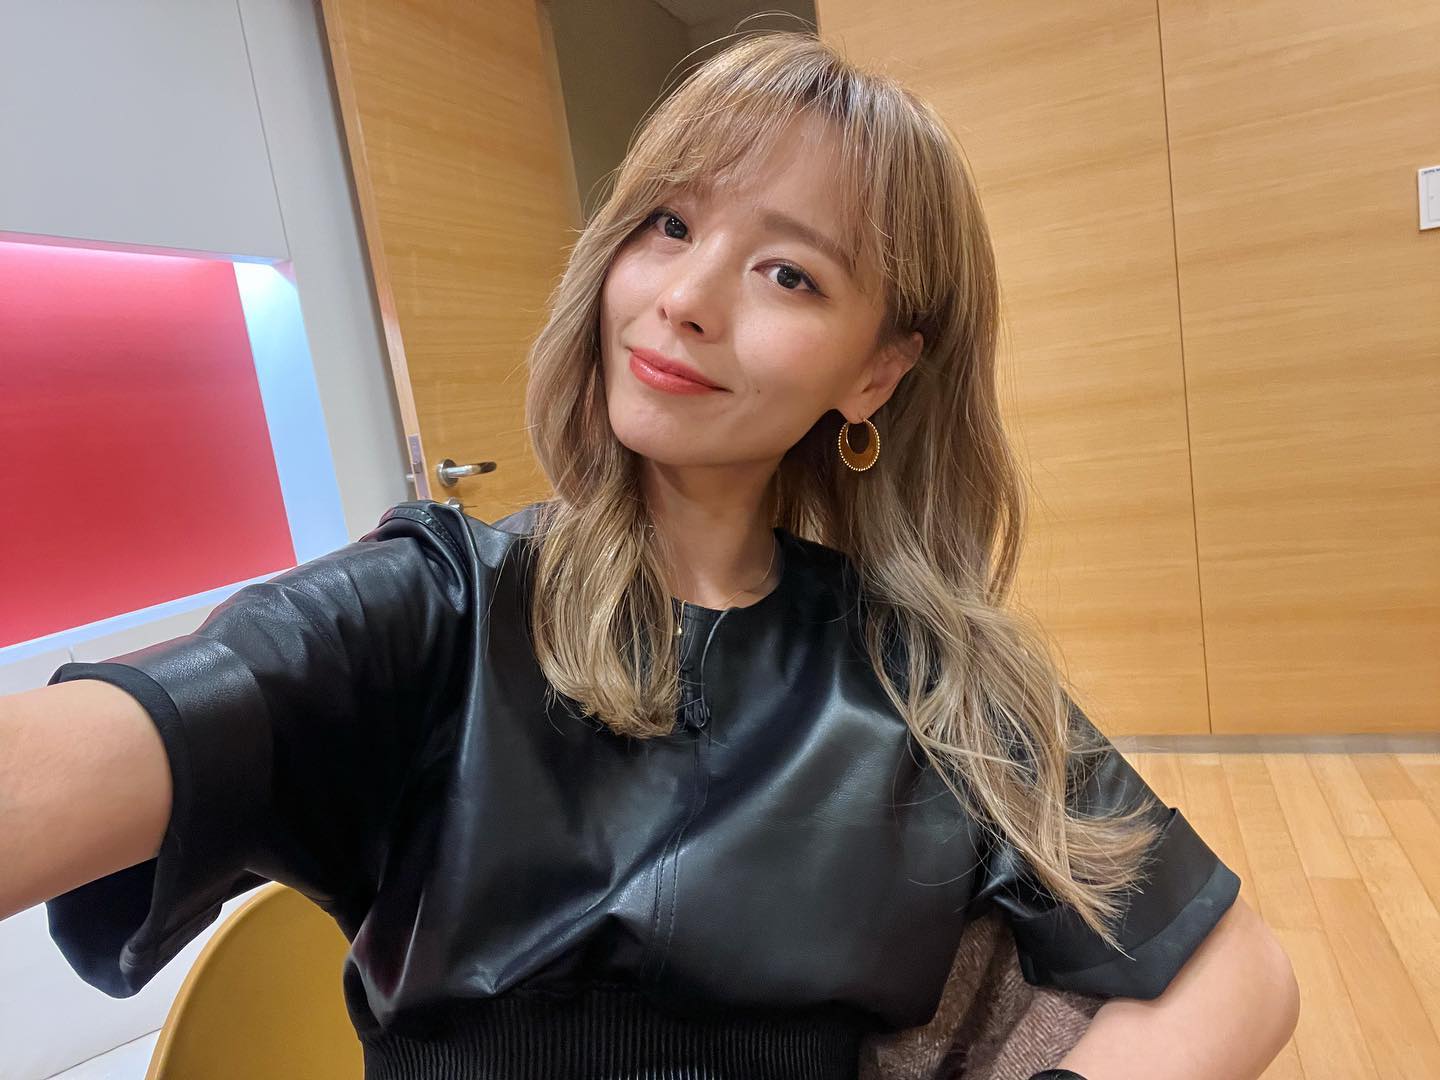 Sunye Reveals What She'll Do If Her Daughter Wants to Pursue an Idol Career